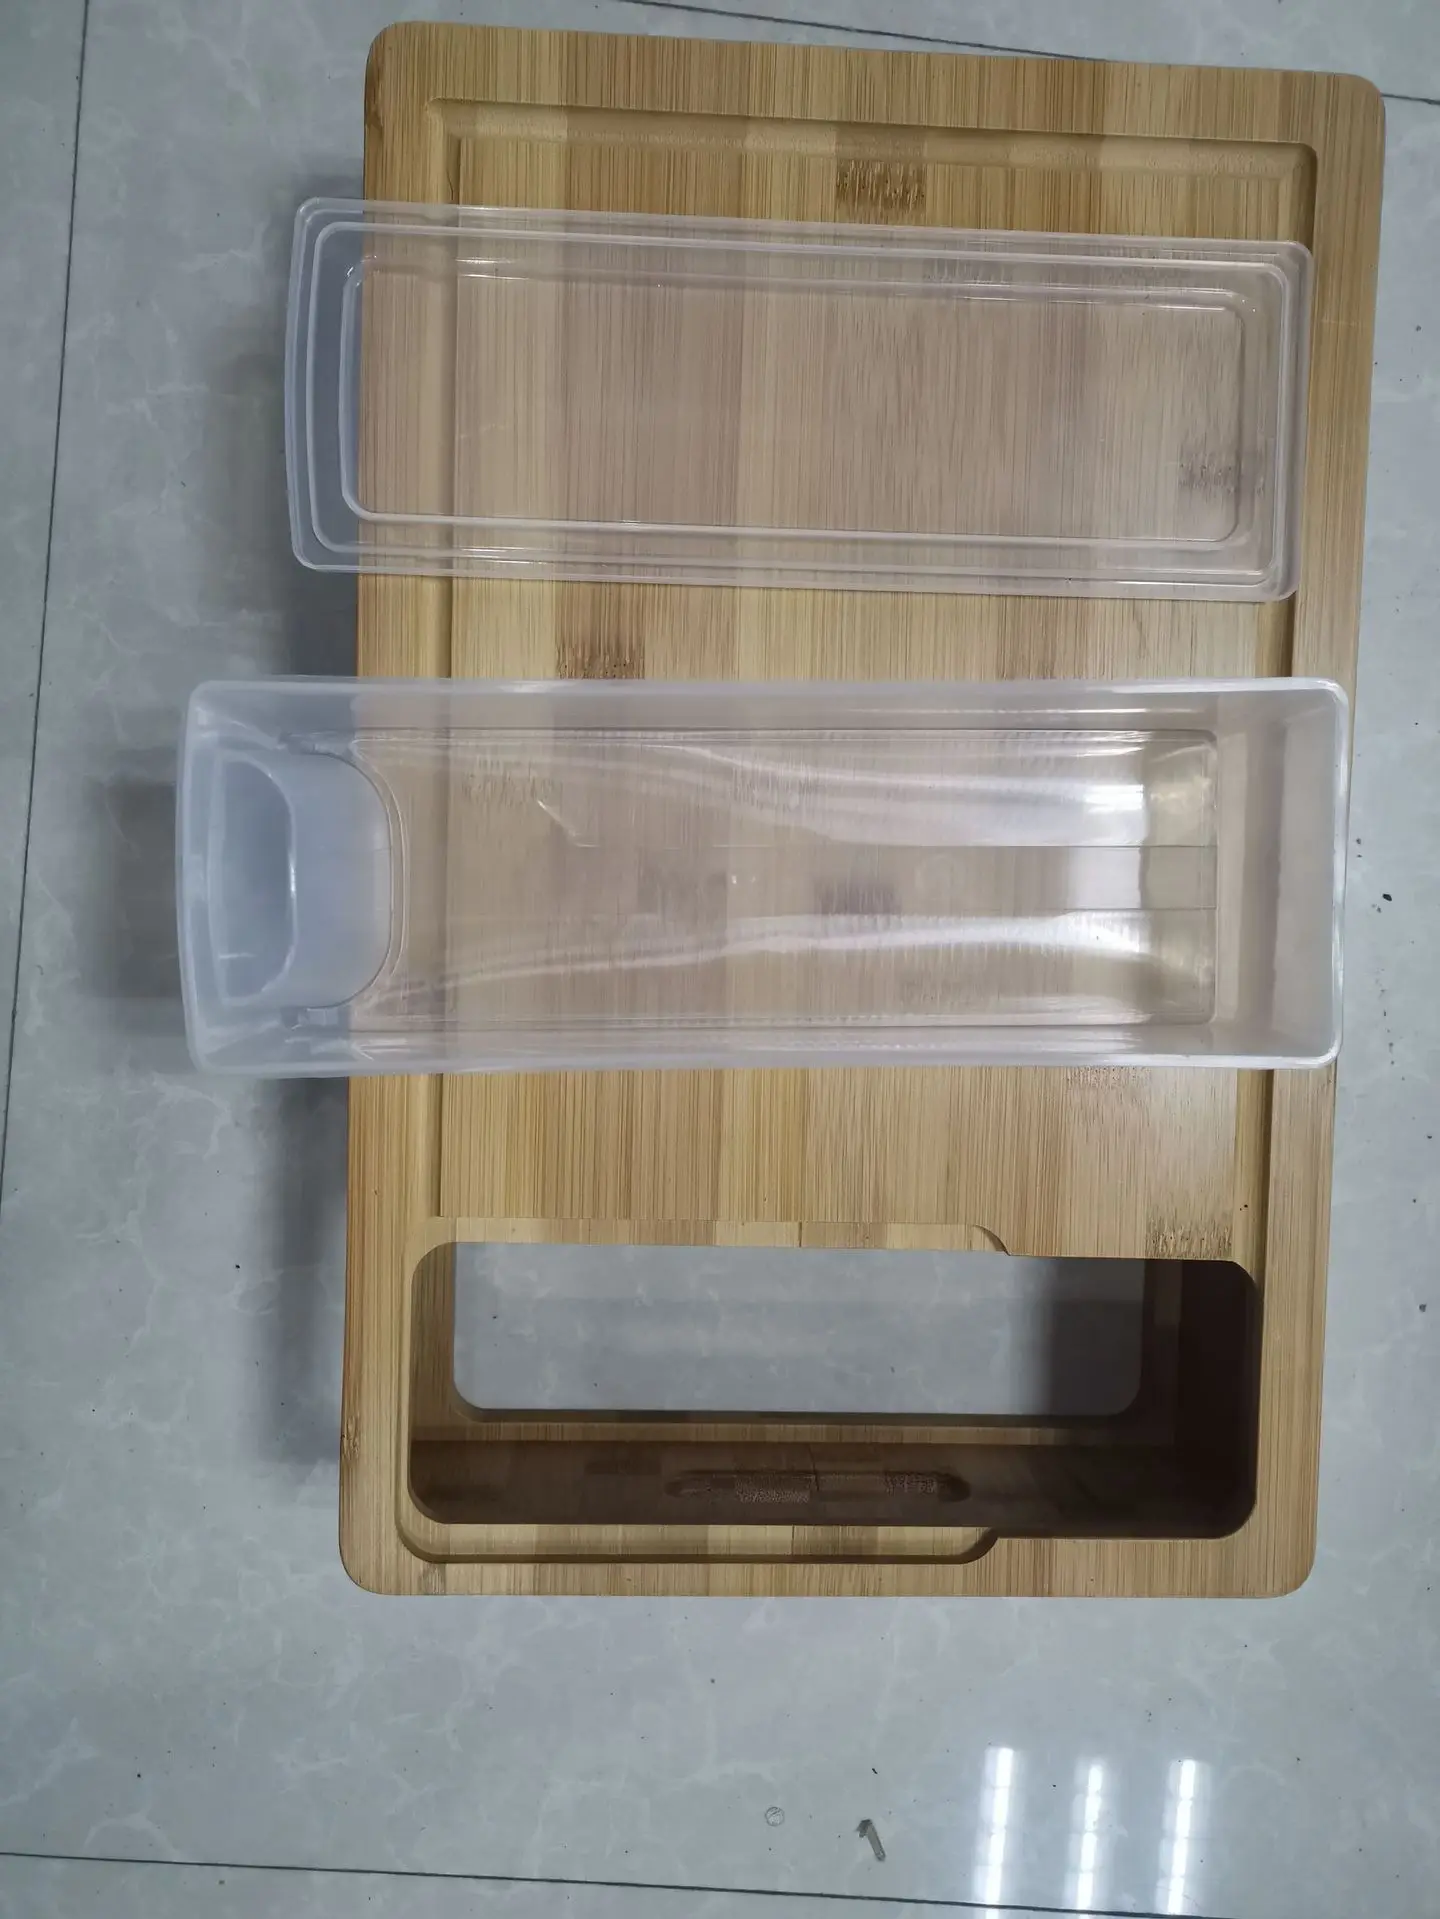 Multi-functional cutting board Comes with 4 Slicers and 4 draws Bamboo Cutting Board With Trays and LIDS